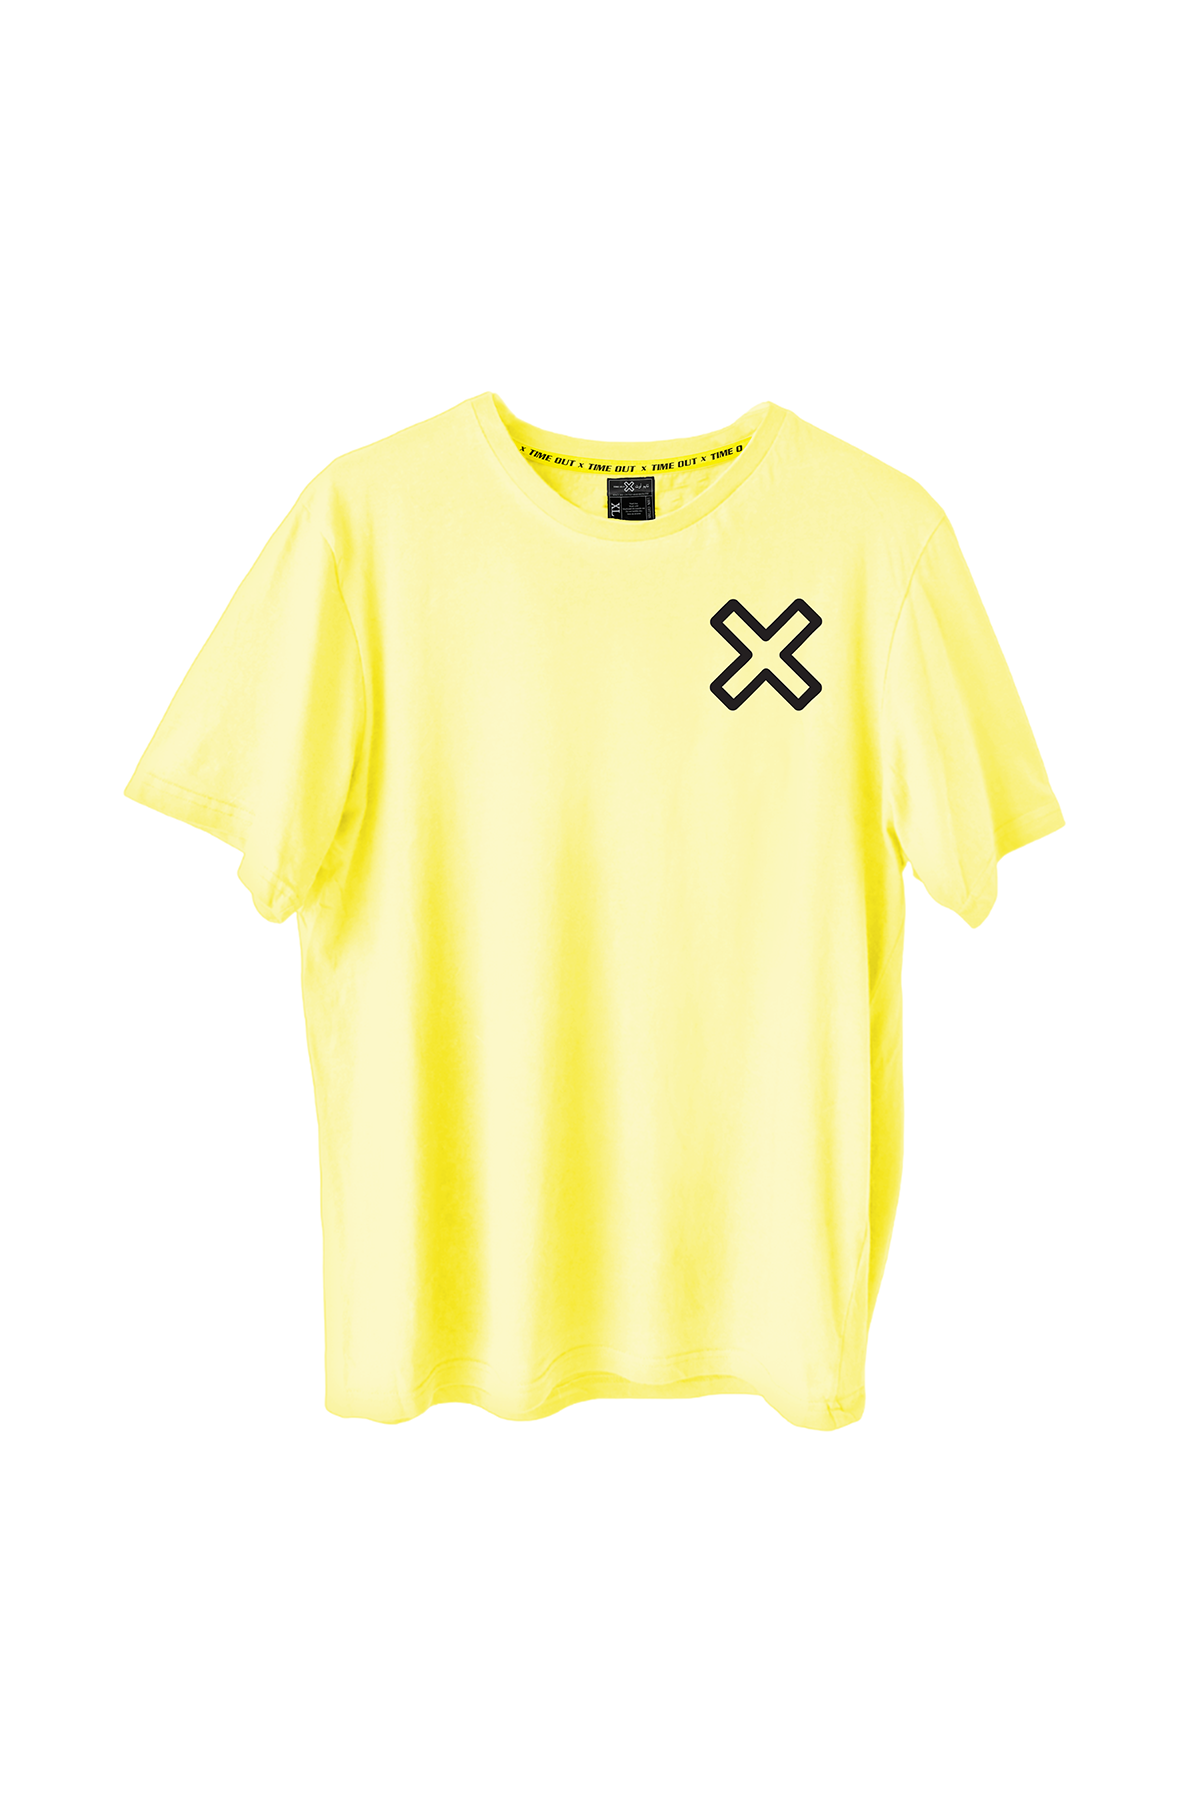 Time-Out-X-Signature-Minimalist-Cotton-Yellow-T-Shirt—Front